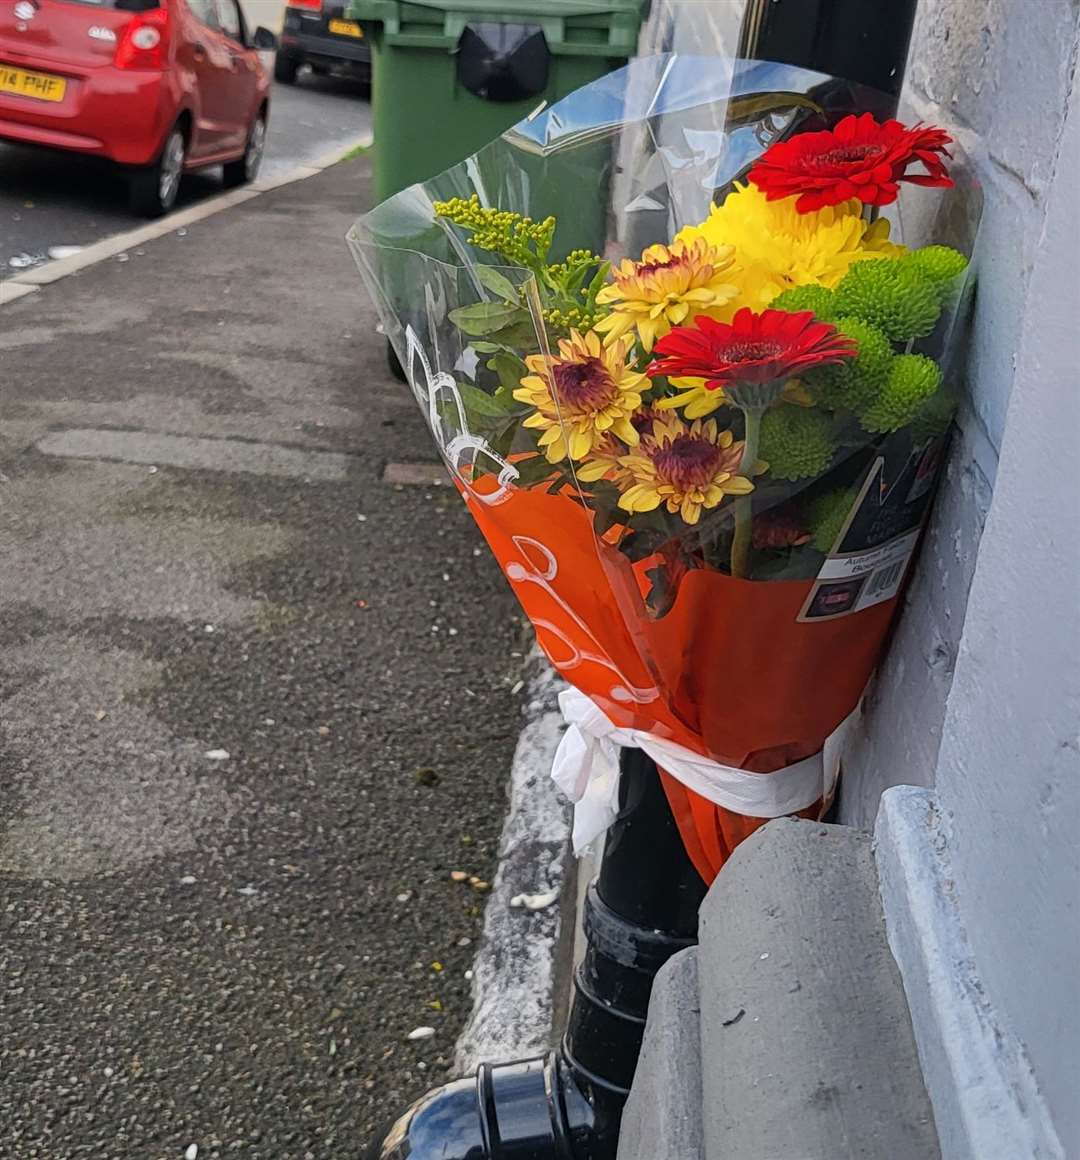 A floral tribute was placed at the scene of the fatal attack in New Street, Folkestone